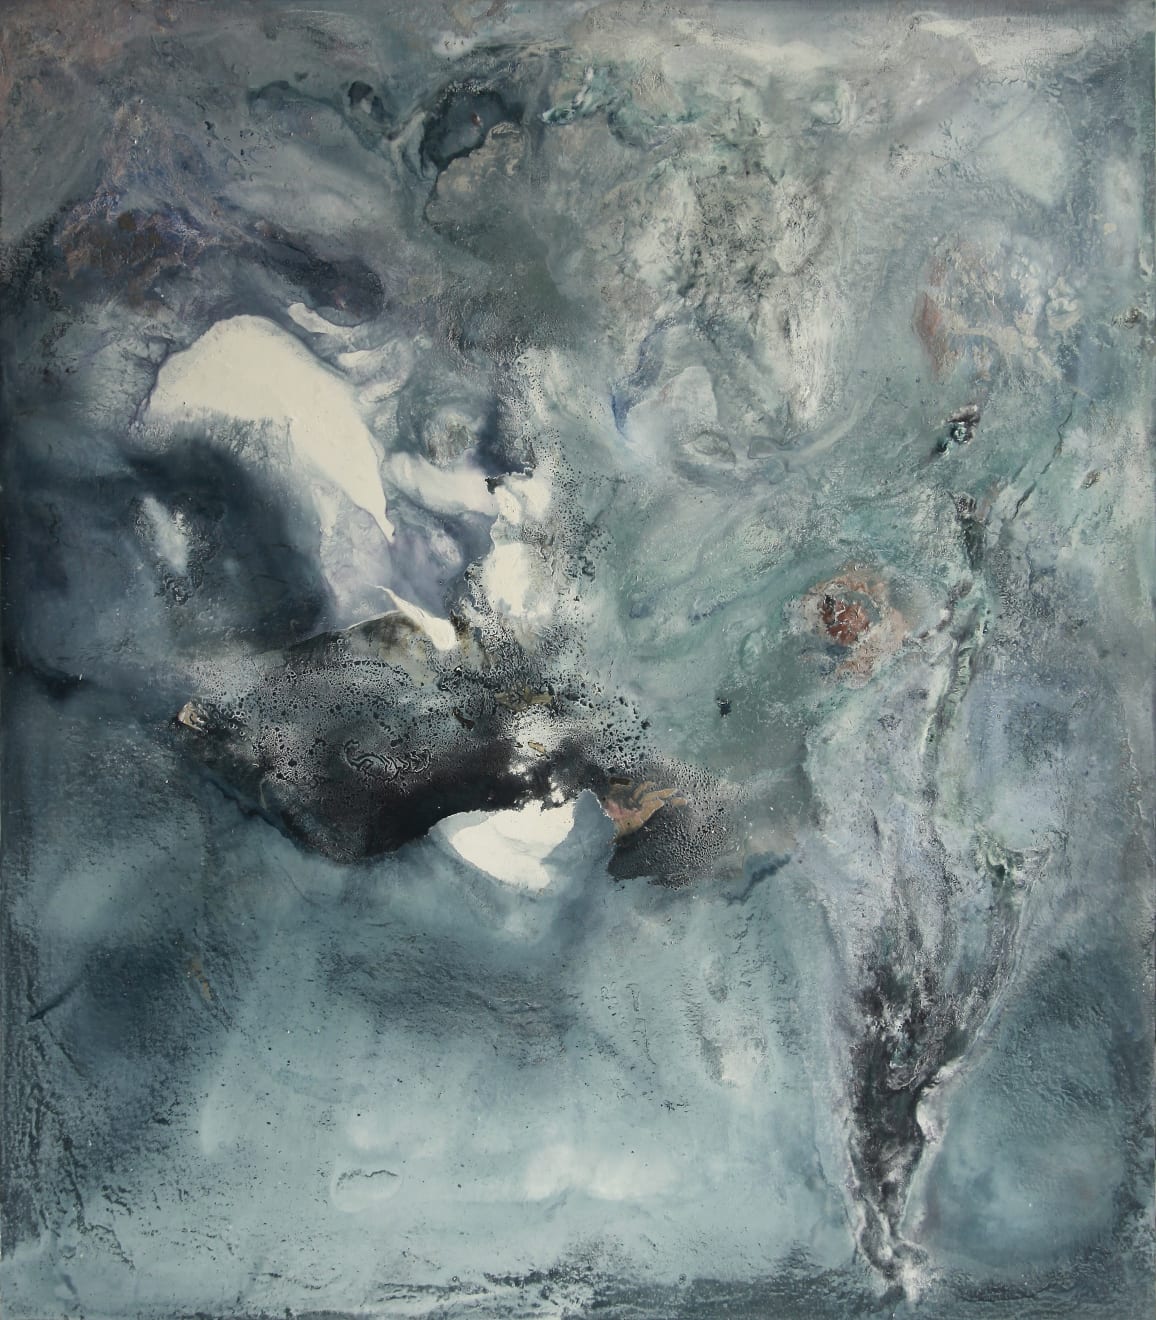 Sea Cave Oil and Acrylic on Linen Mounted Board 162 x 185cm AUD $11 900 SOLD